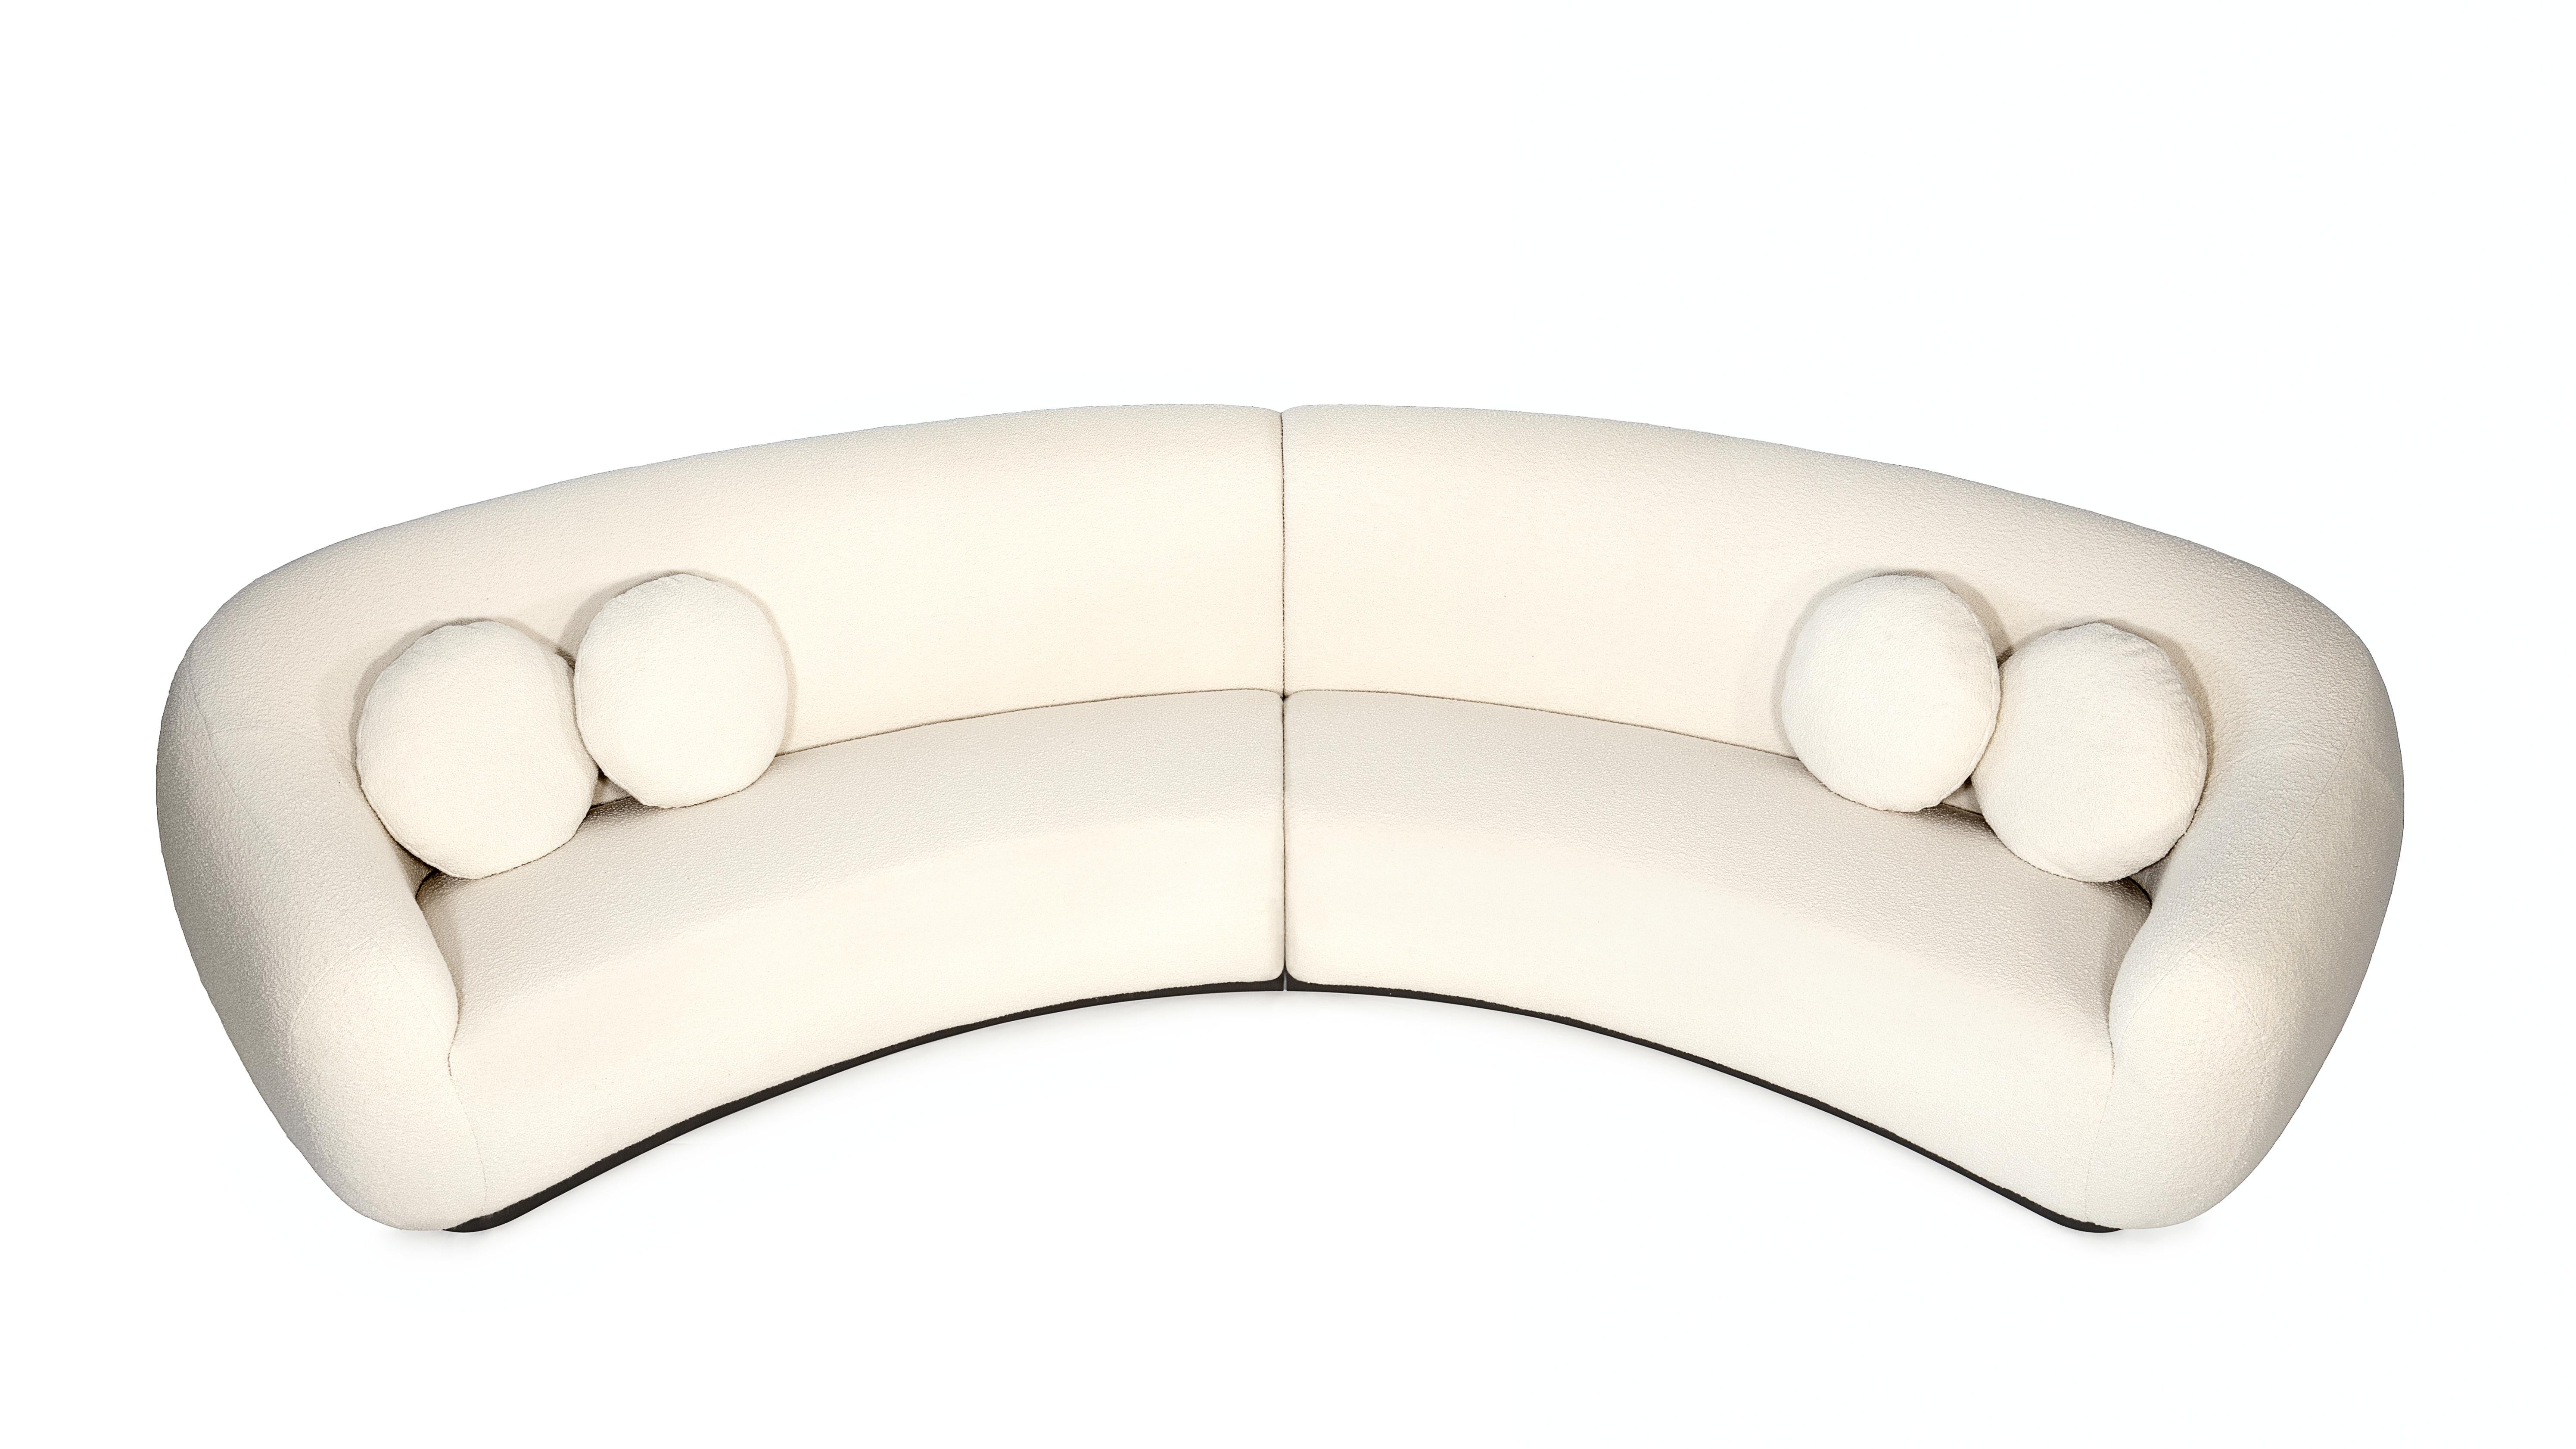 Other Niemeyer II Round Sofa by InsidherLand For Sale